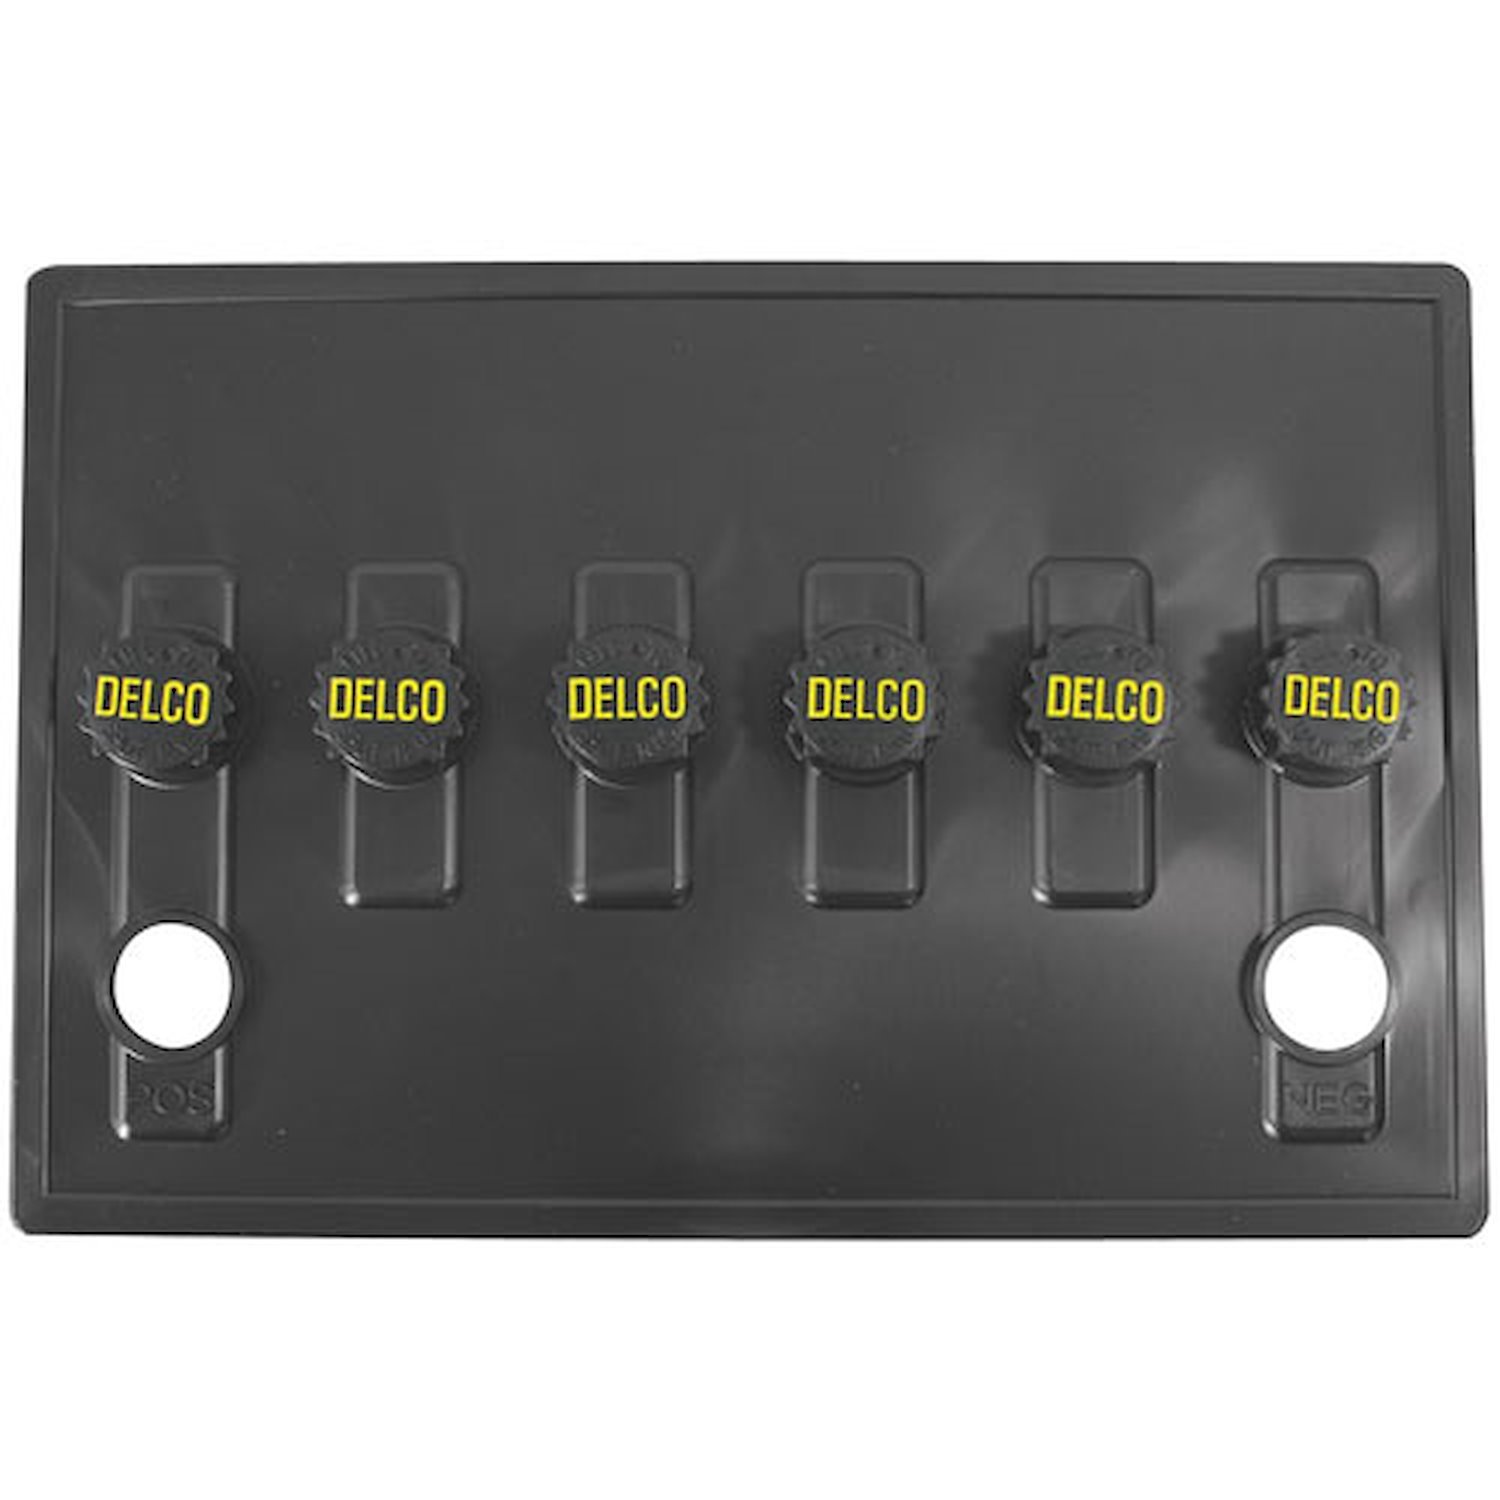 Battery Cover for DC12 Top Post Battery [Delco Logo]